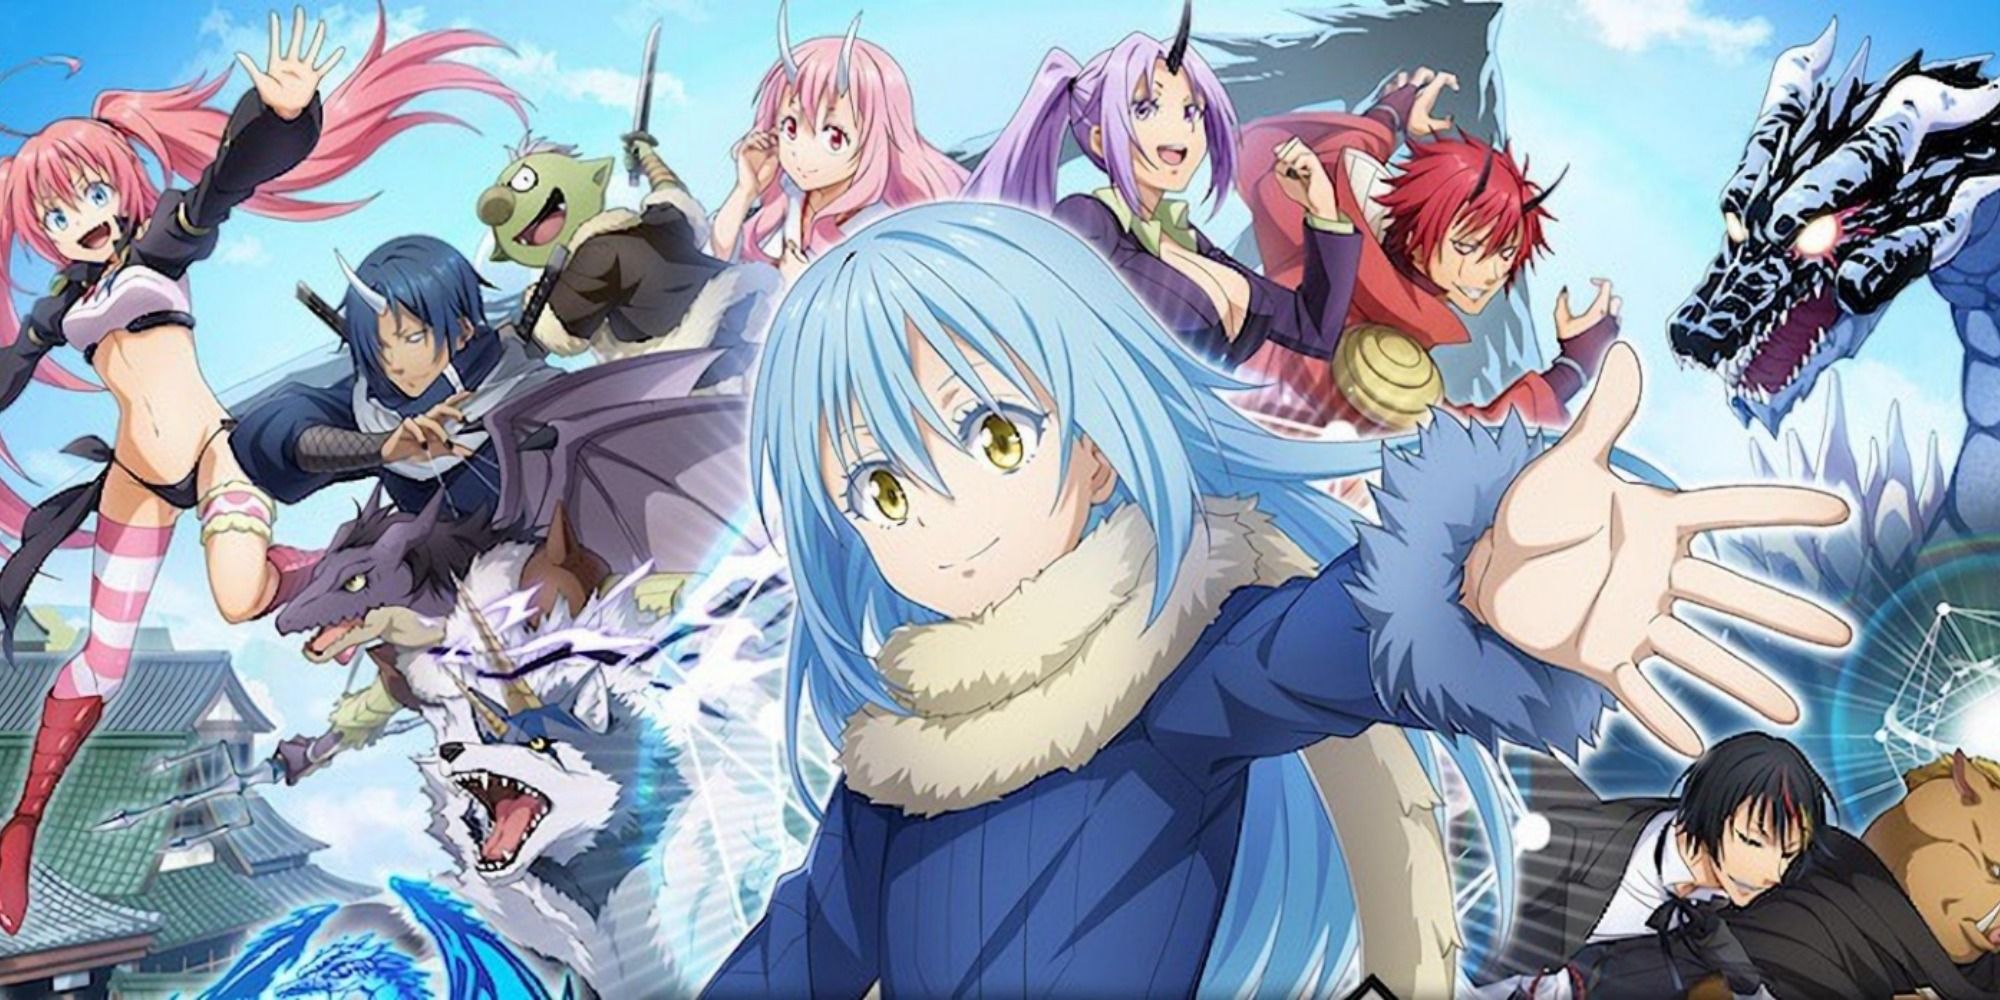 Cover art for the anime That Time I Got Reincarnated As A Slime